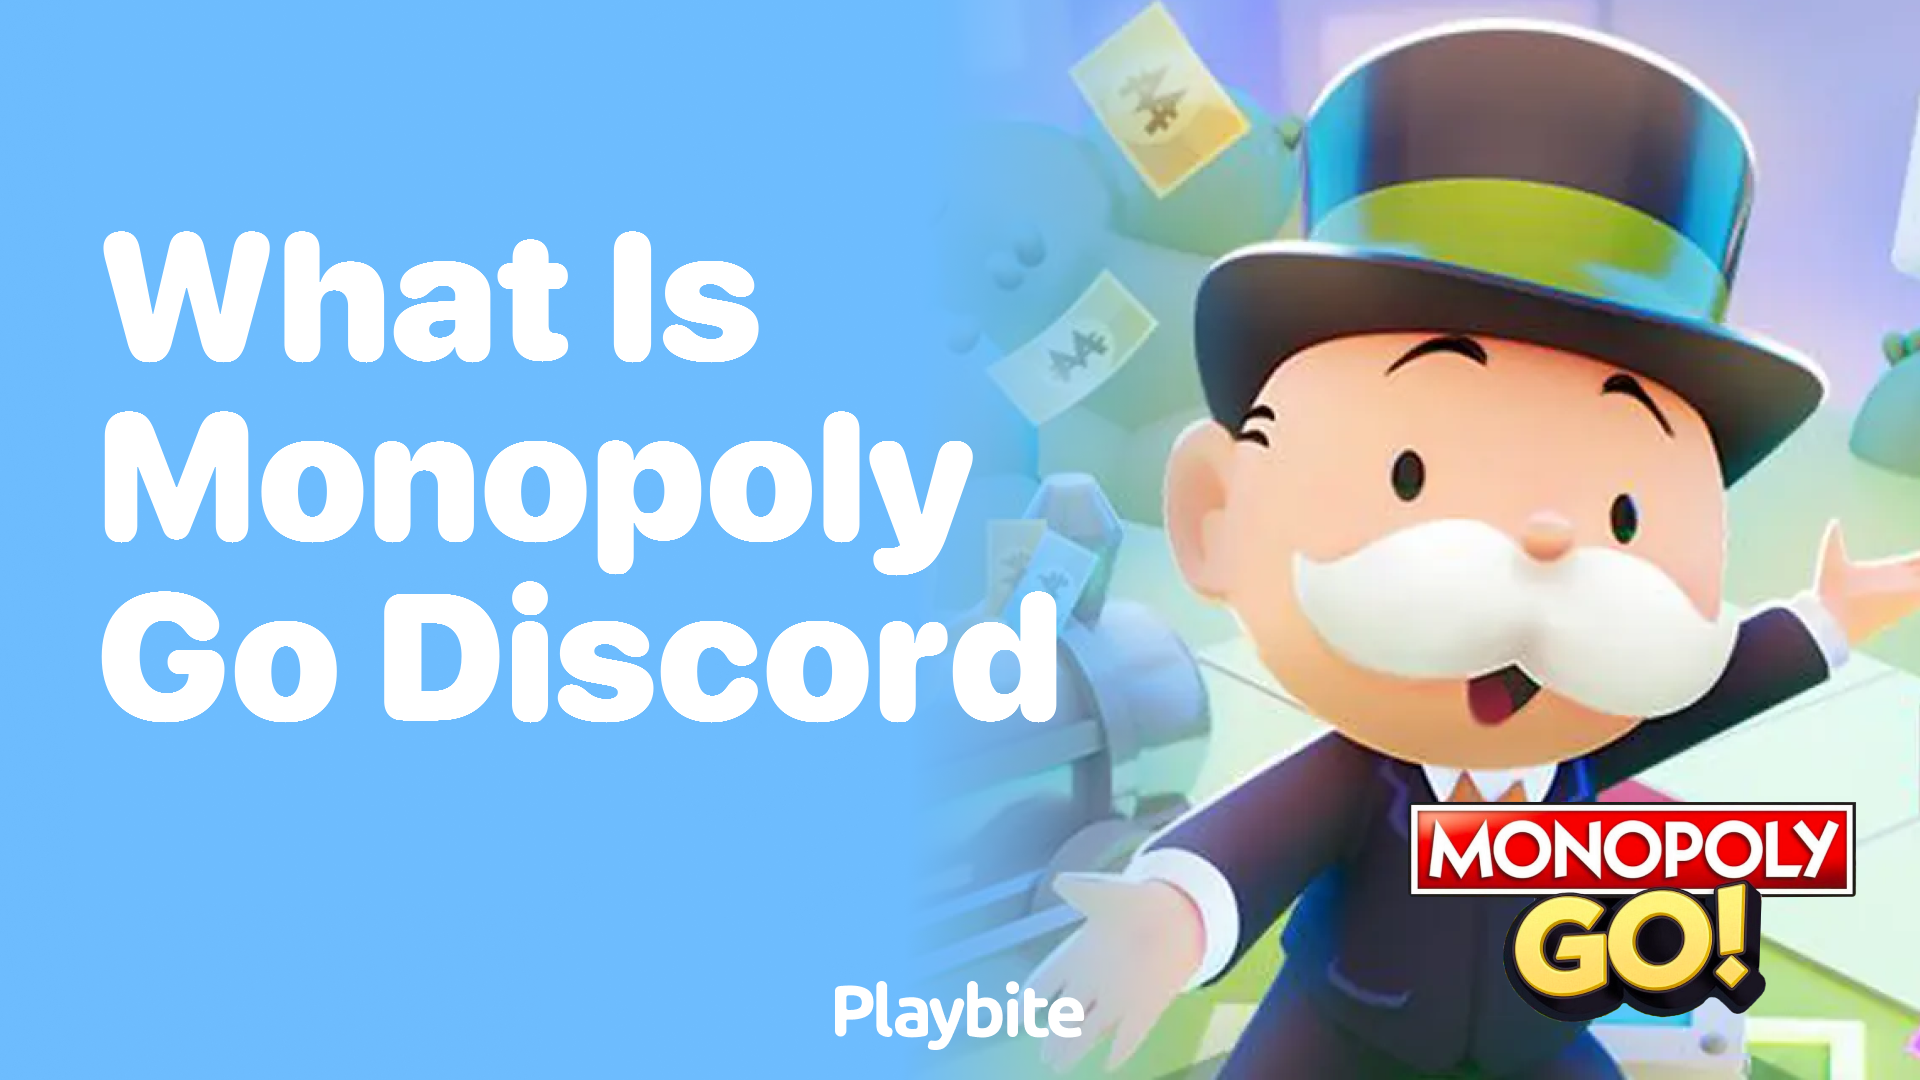 What is Monopoly Go Discord?